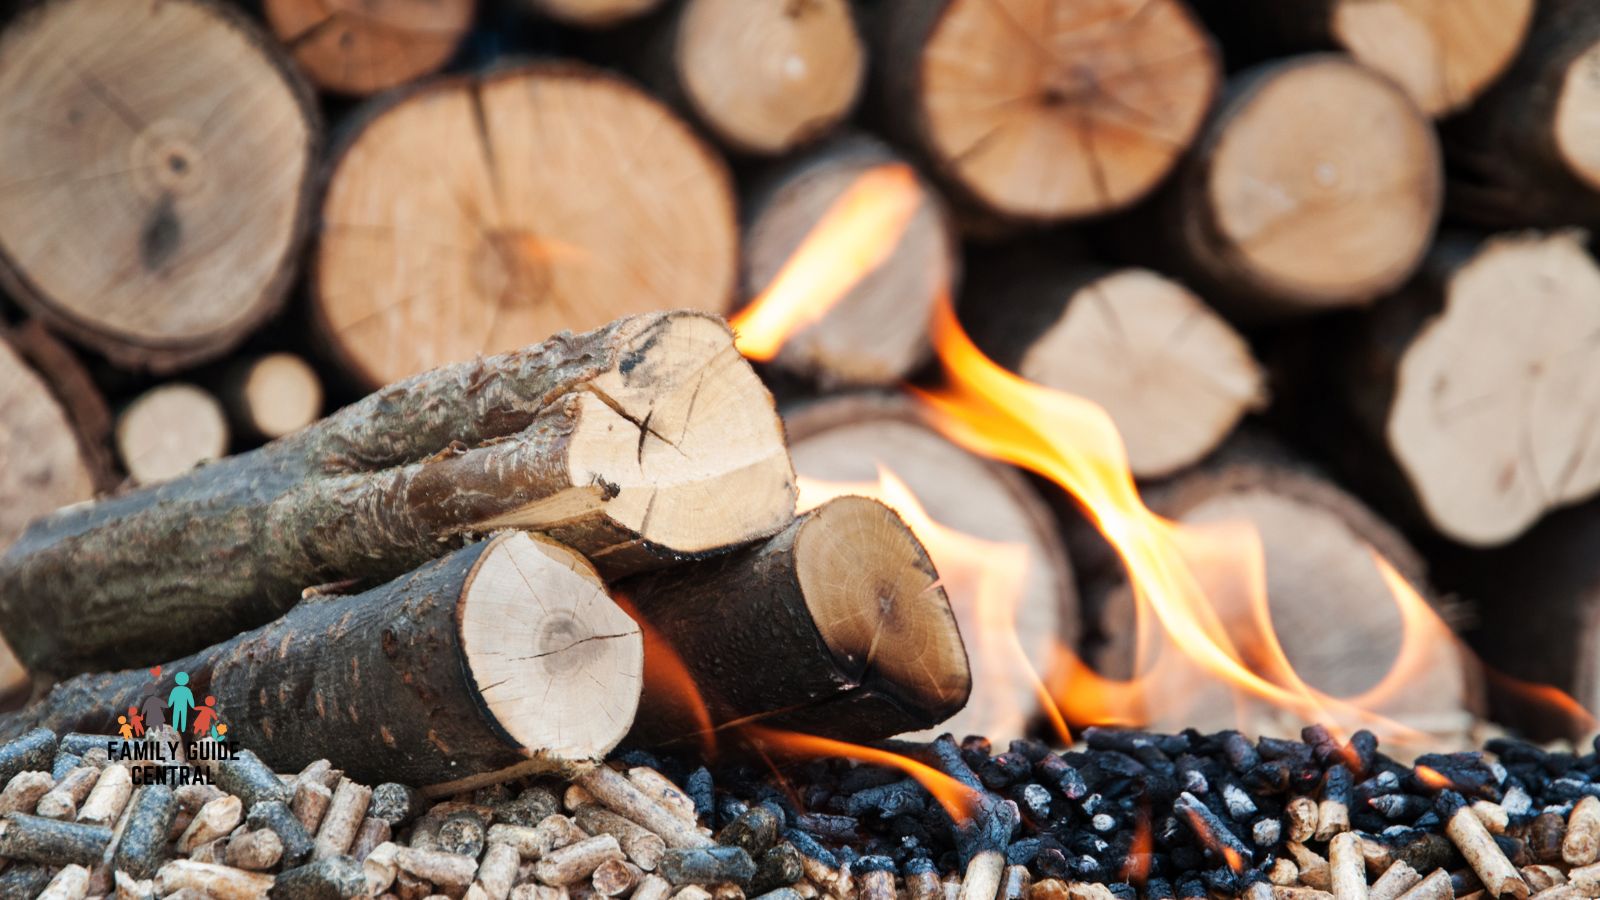 Wood being burned on top of pellets - familyguidecentral.com